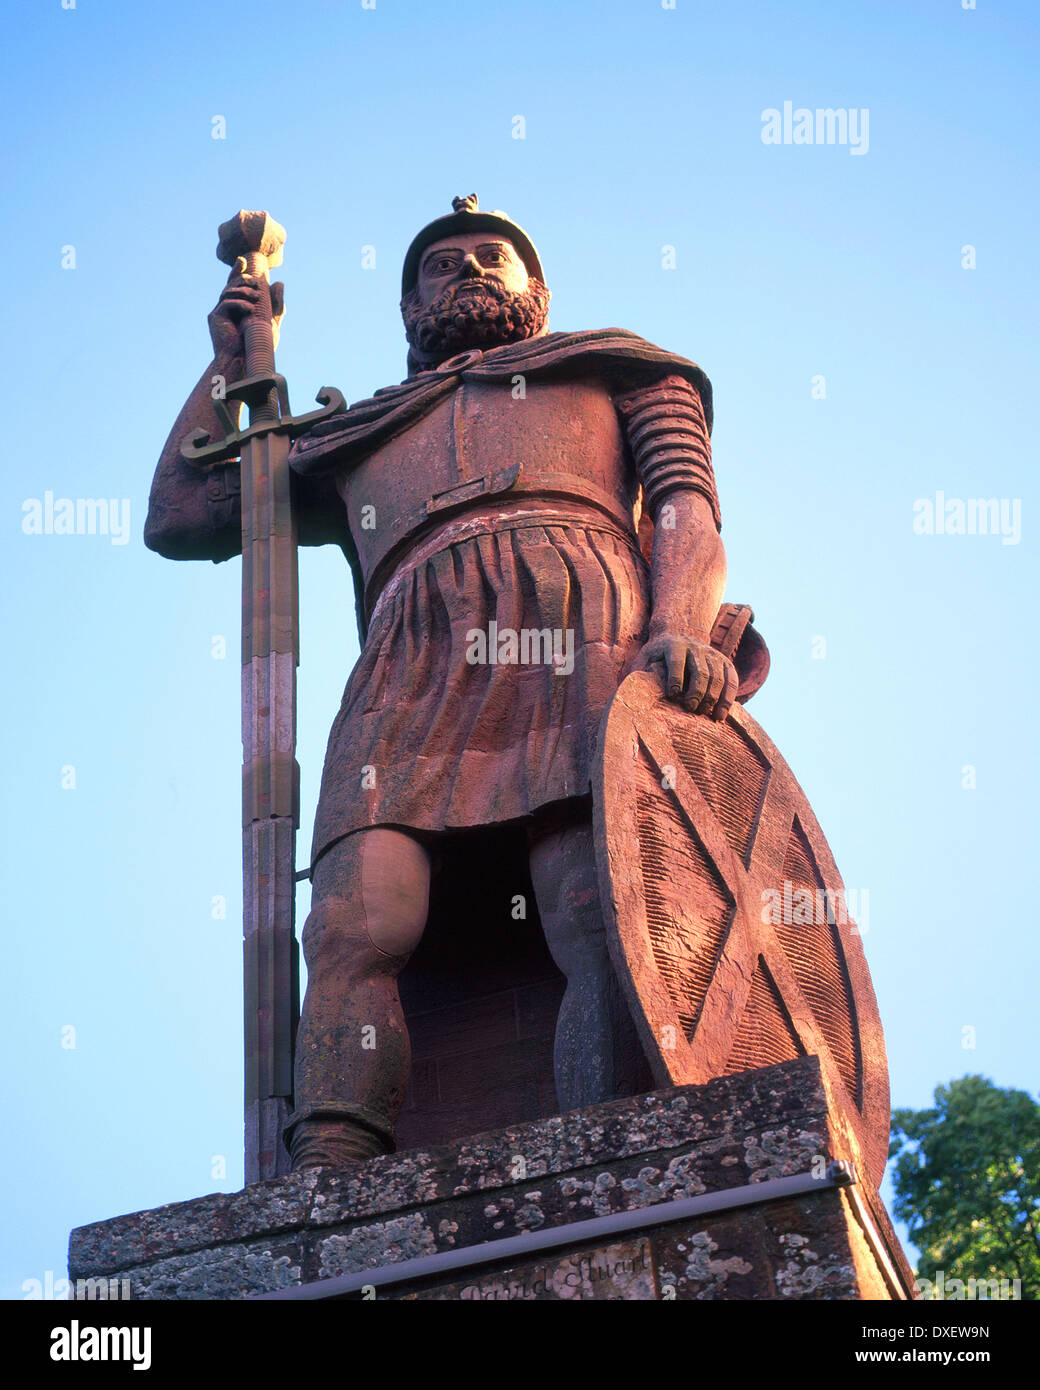 William Wallace Statue - Scottish Borders Banque D'Images